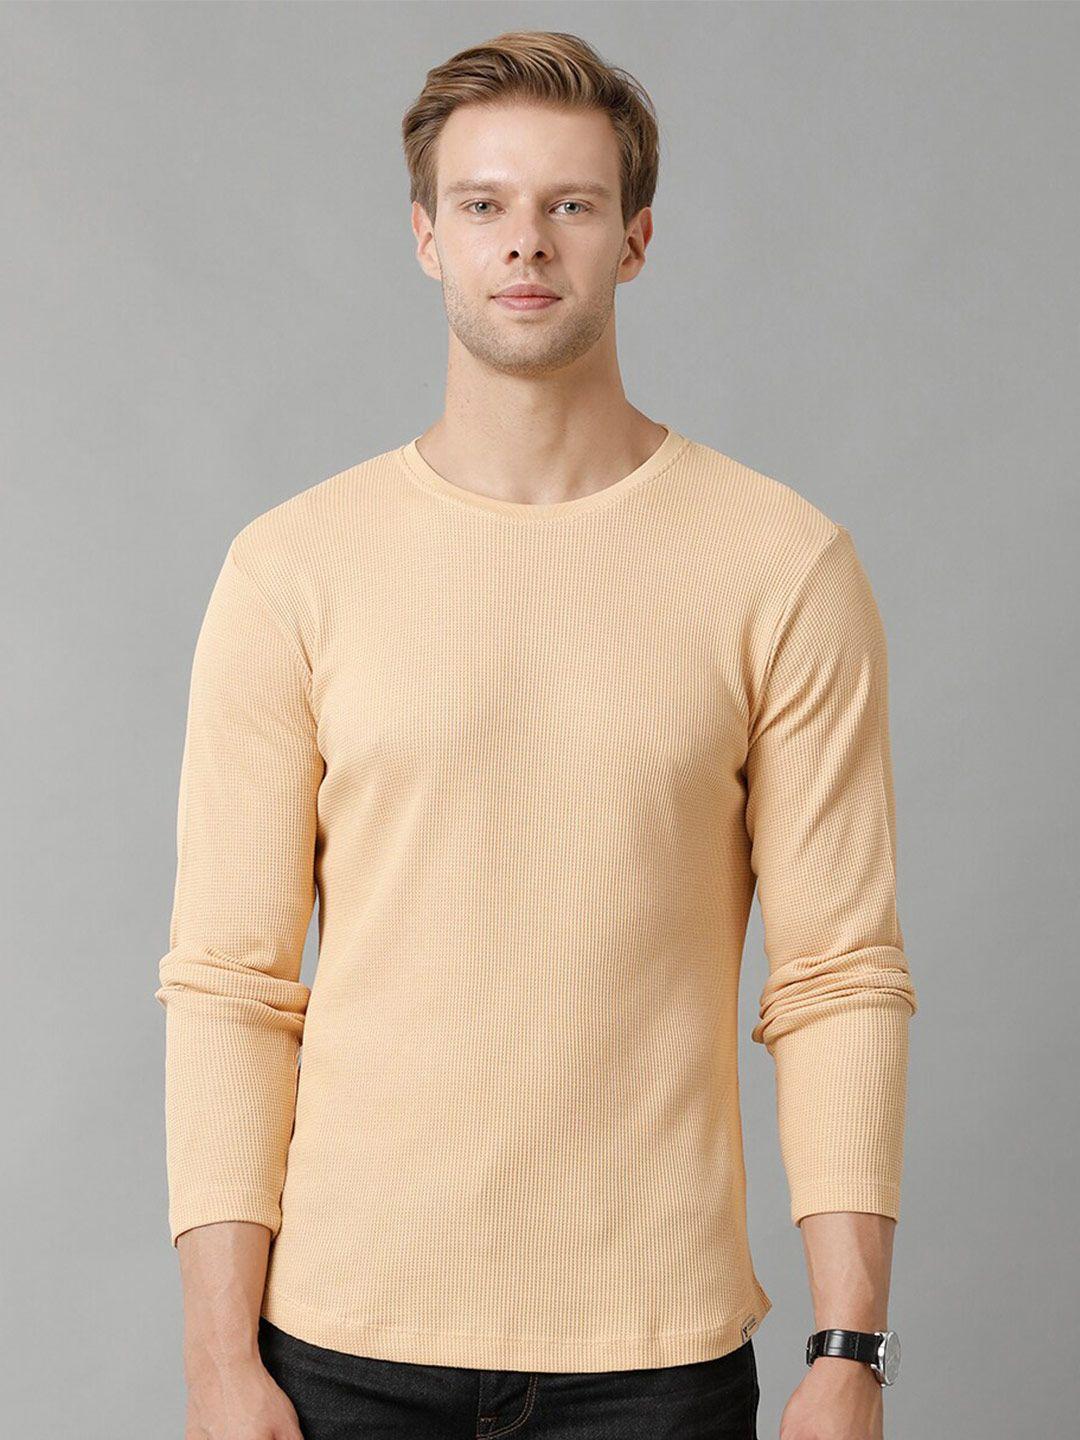 voi jeans long sleeves pure cotton t-shirt